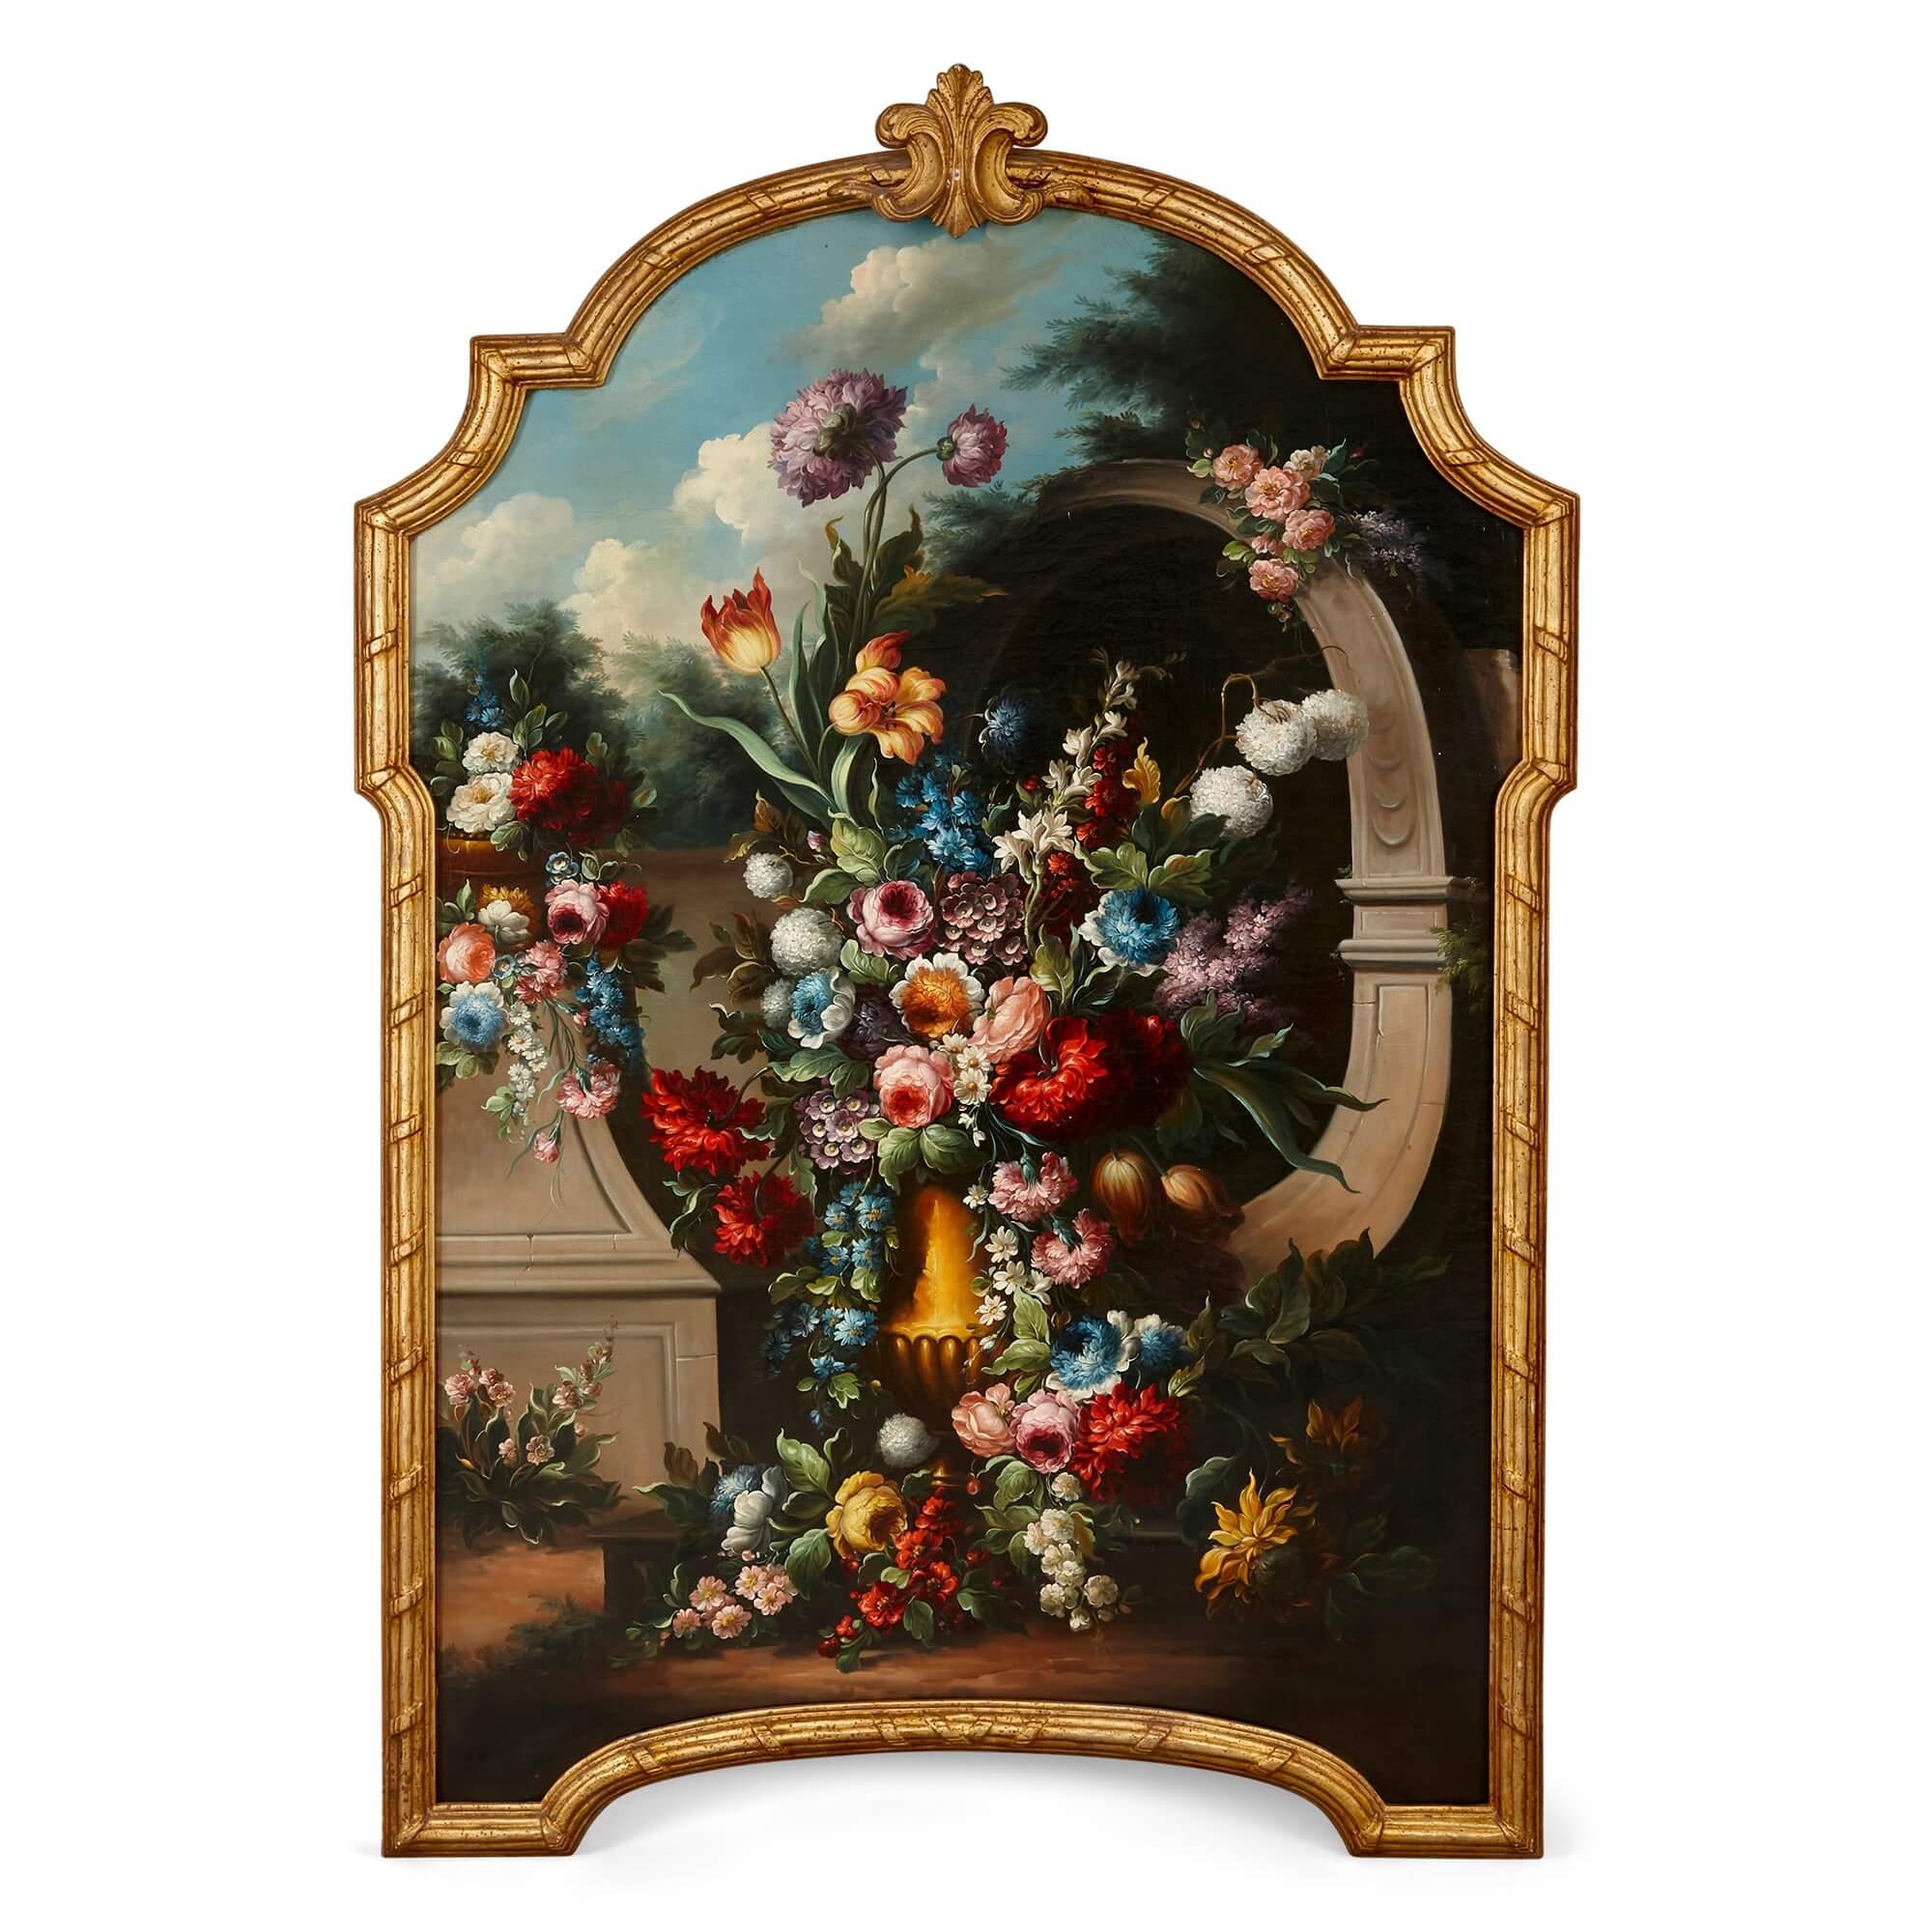 Pair of large Baroque style floral still life oil paintings
Continental, 19th Century 
Canvas: Height 144cm, width 104cm 
Frame: Height 170cm, width 112cm, depth 4cm

This dazzling duo of 19th-century still life oil paintings offers a lively